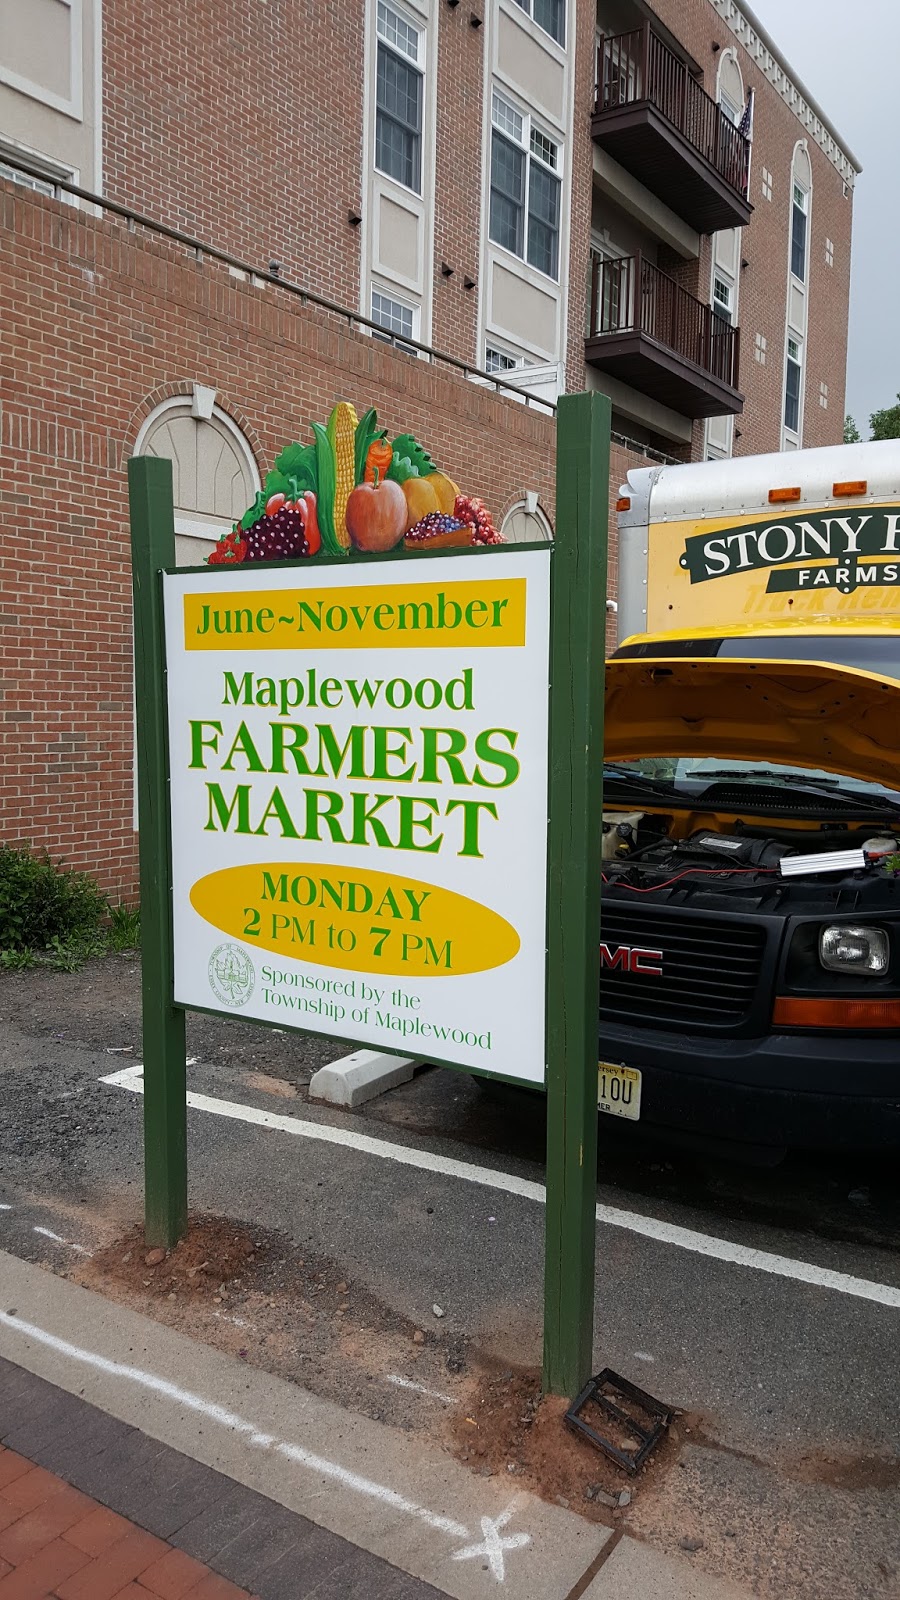 Maplewoodian.com: FARMER'S MARKET IS ON TODAY